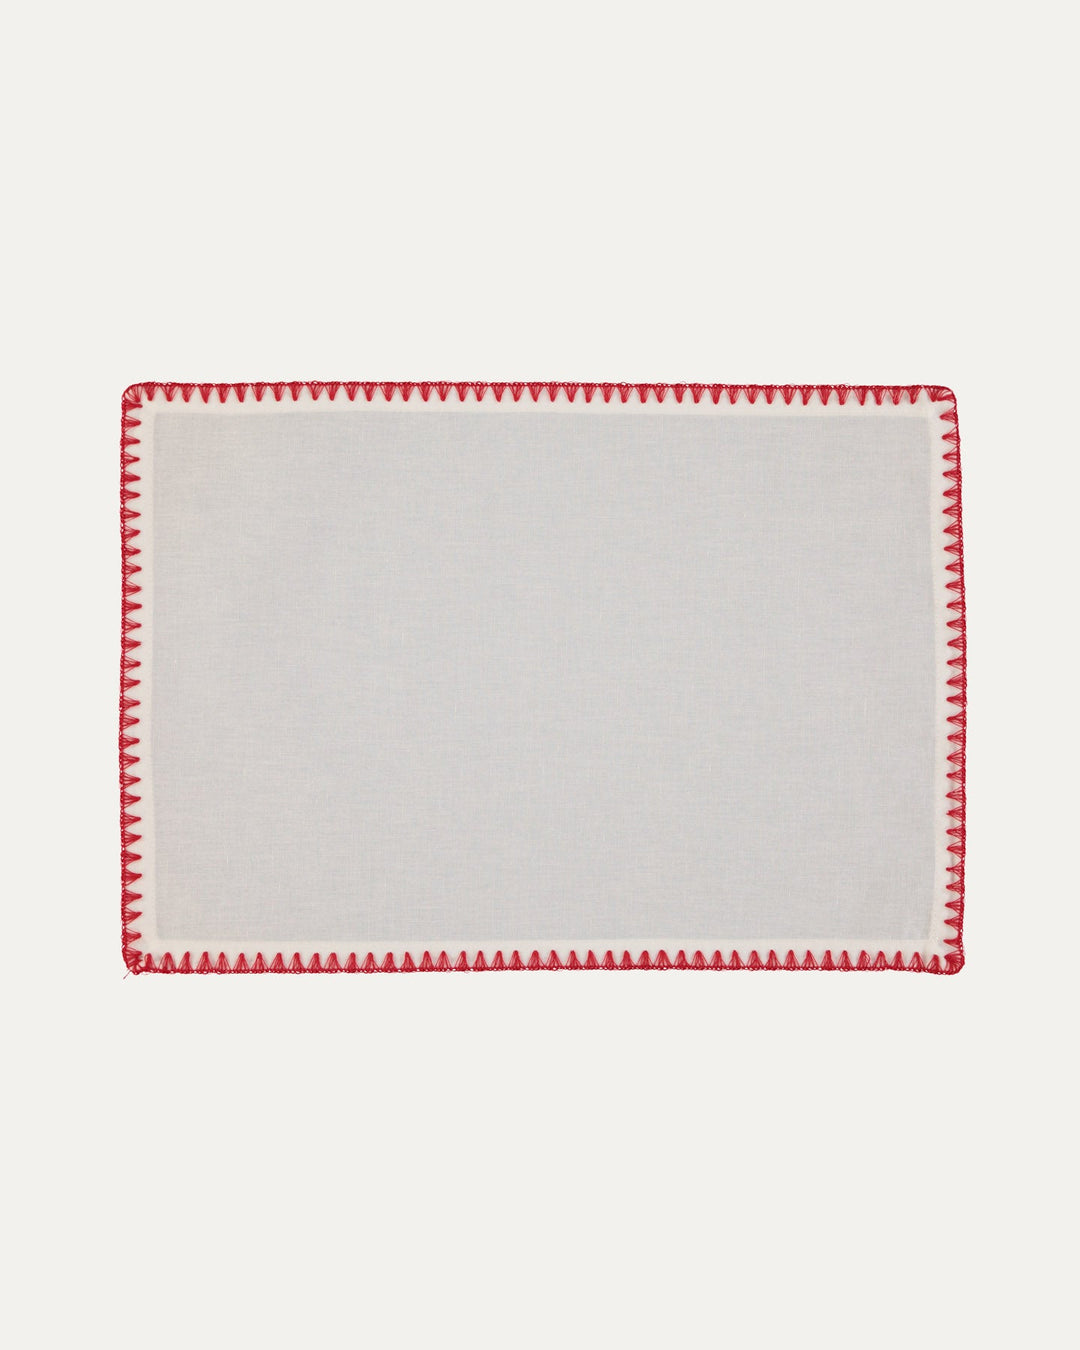 Embroidered Red Placemat